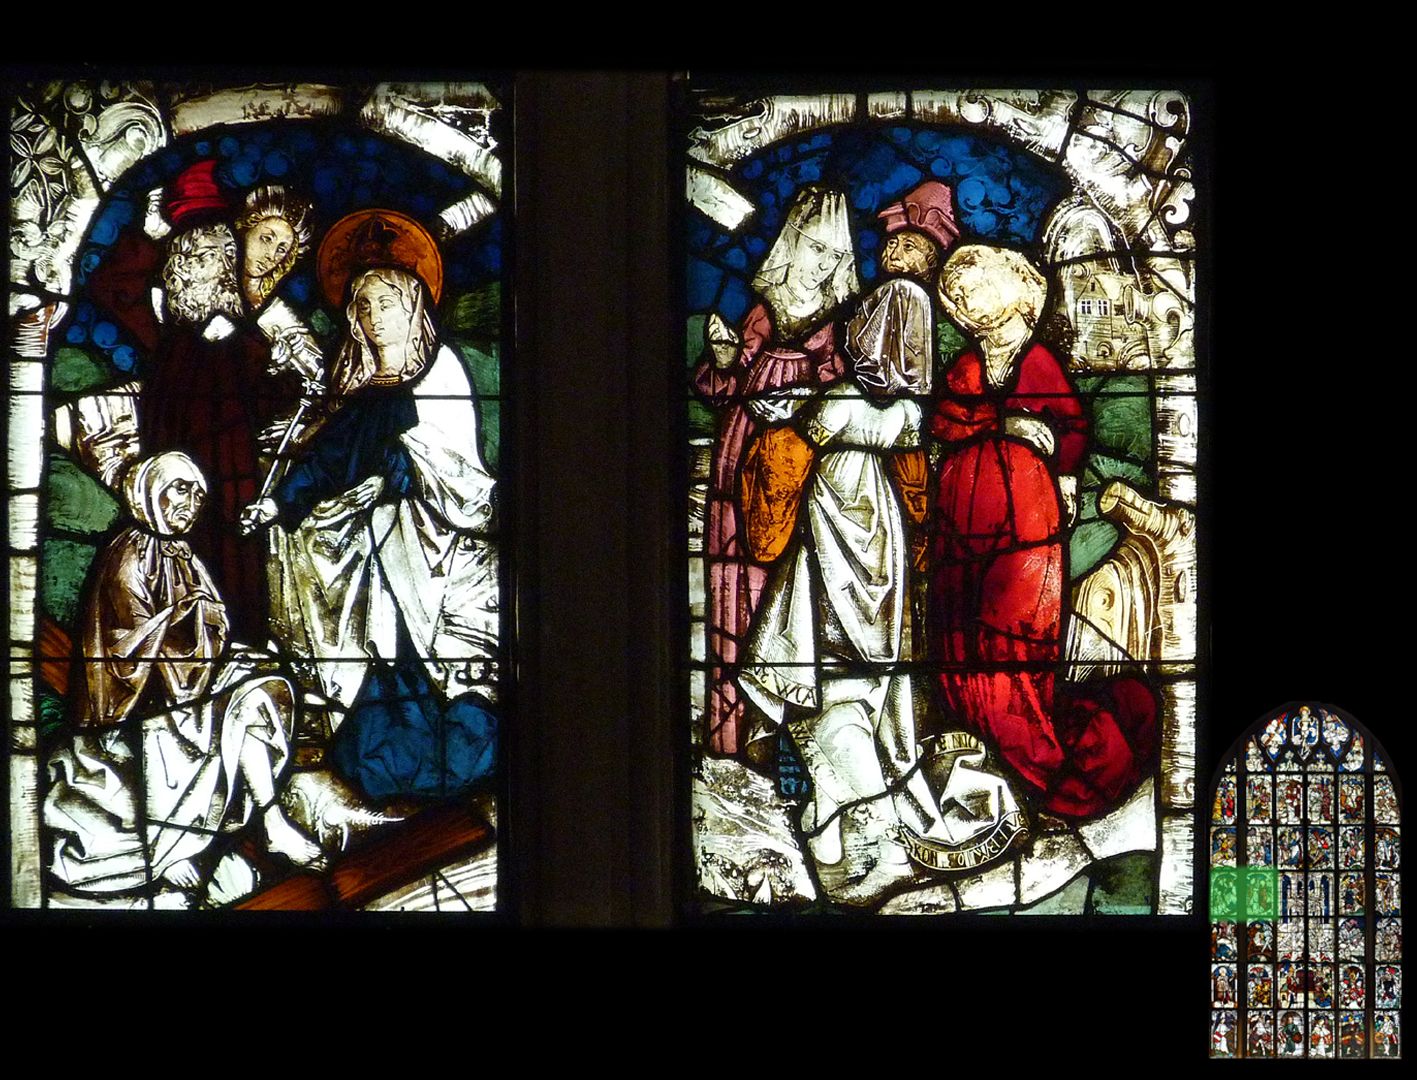 Imperial window Trial of the cross: a resurrected dead man confirms the authenticity of the cross.